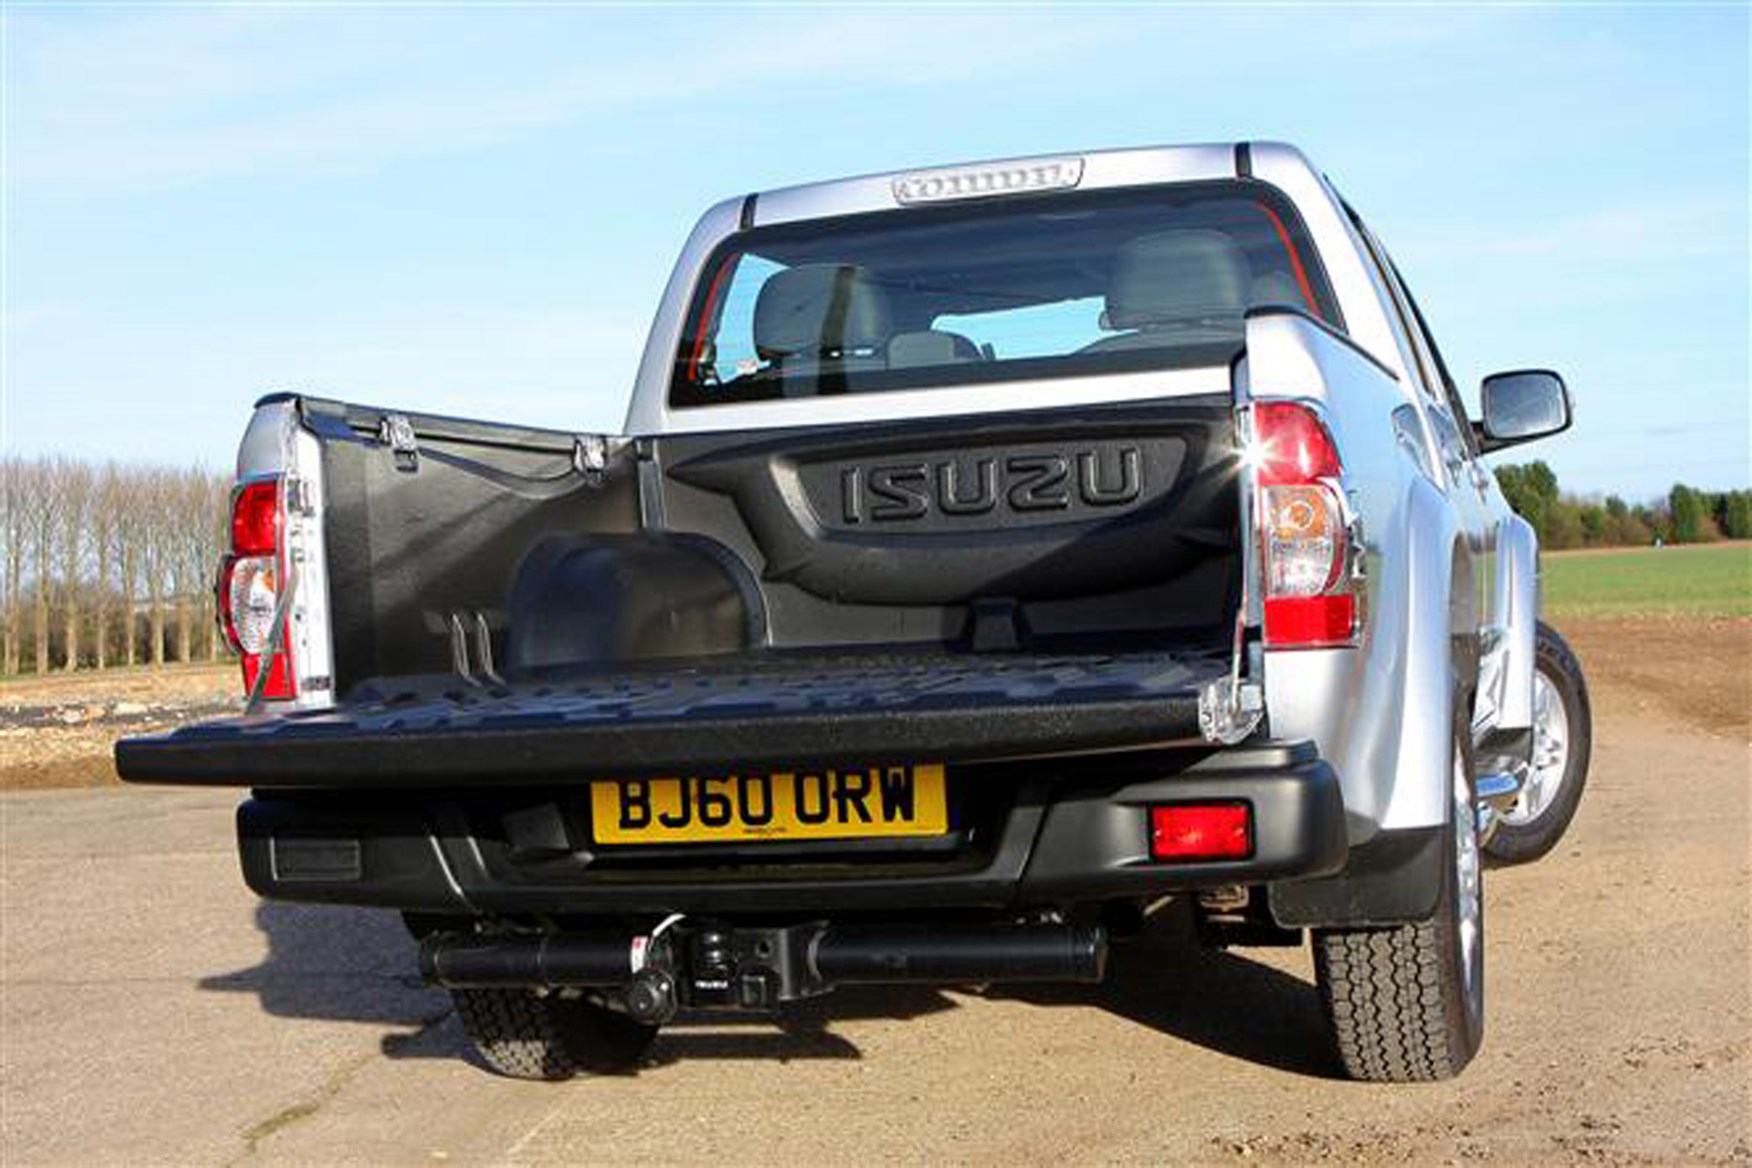 Isuzu Rodeo review on Parkers Vans - load area dimensions